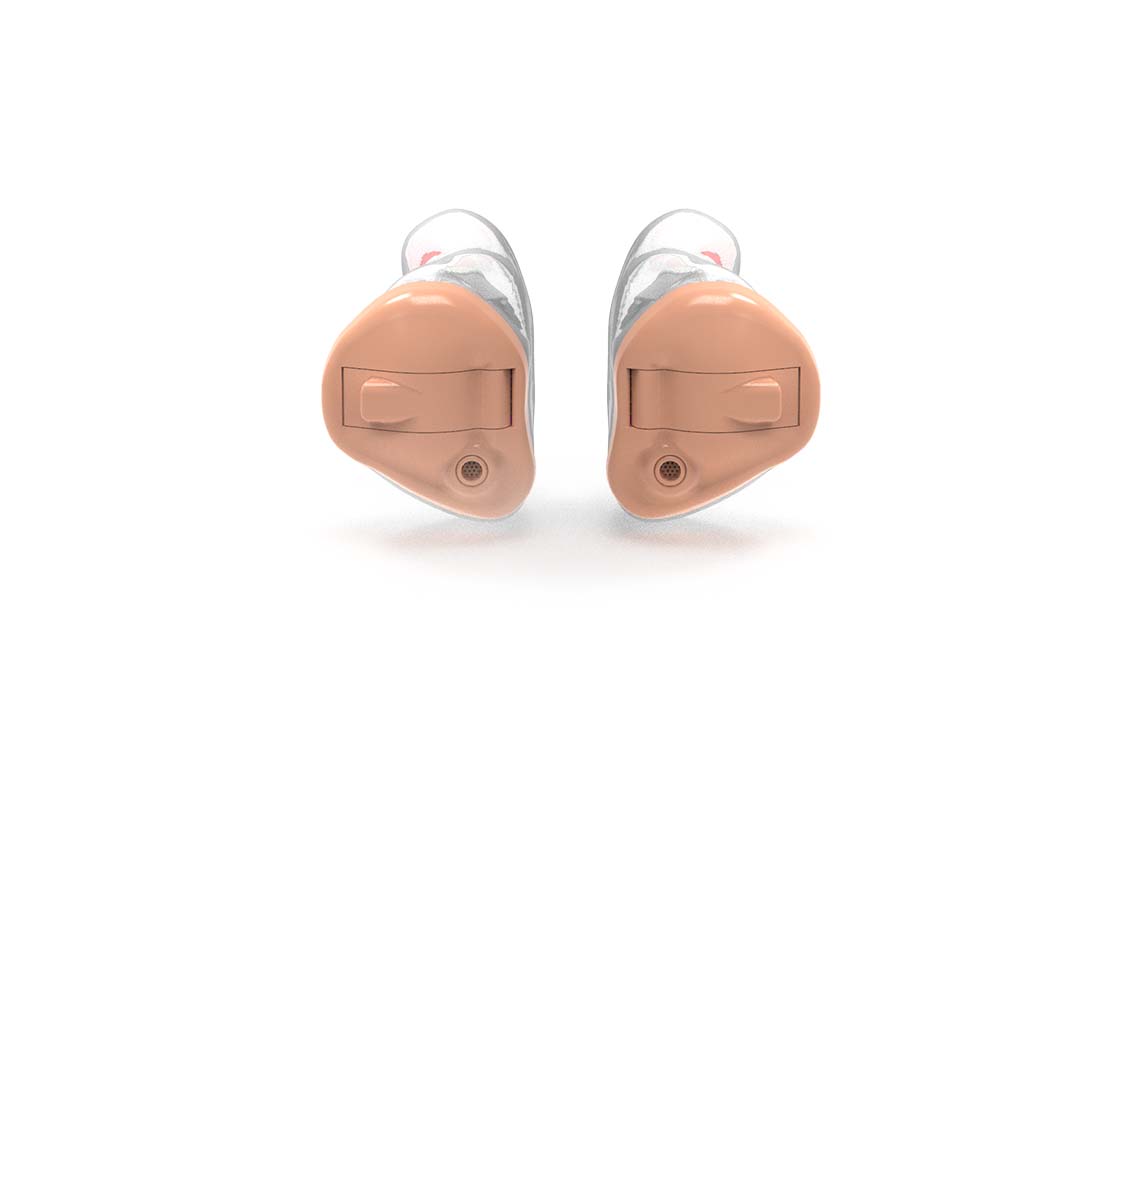 A pair of ITC hearing aids